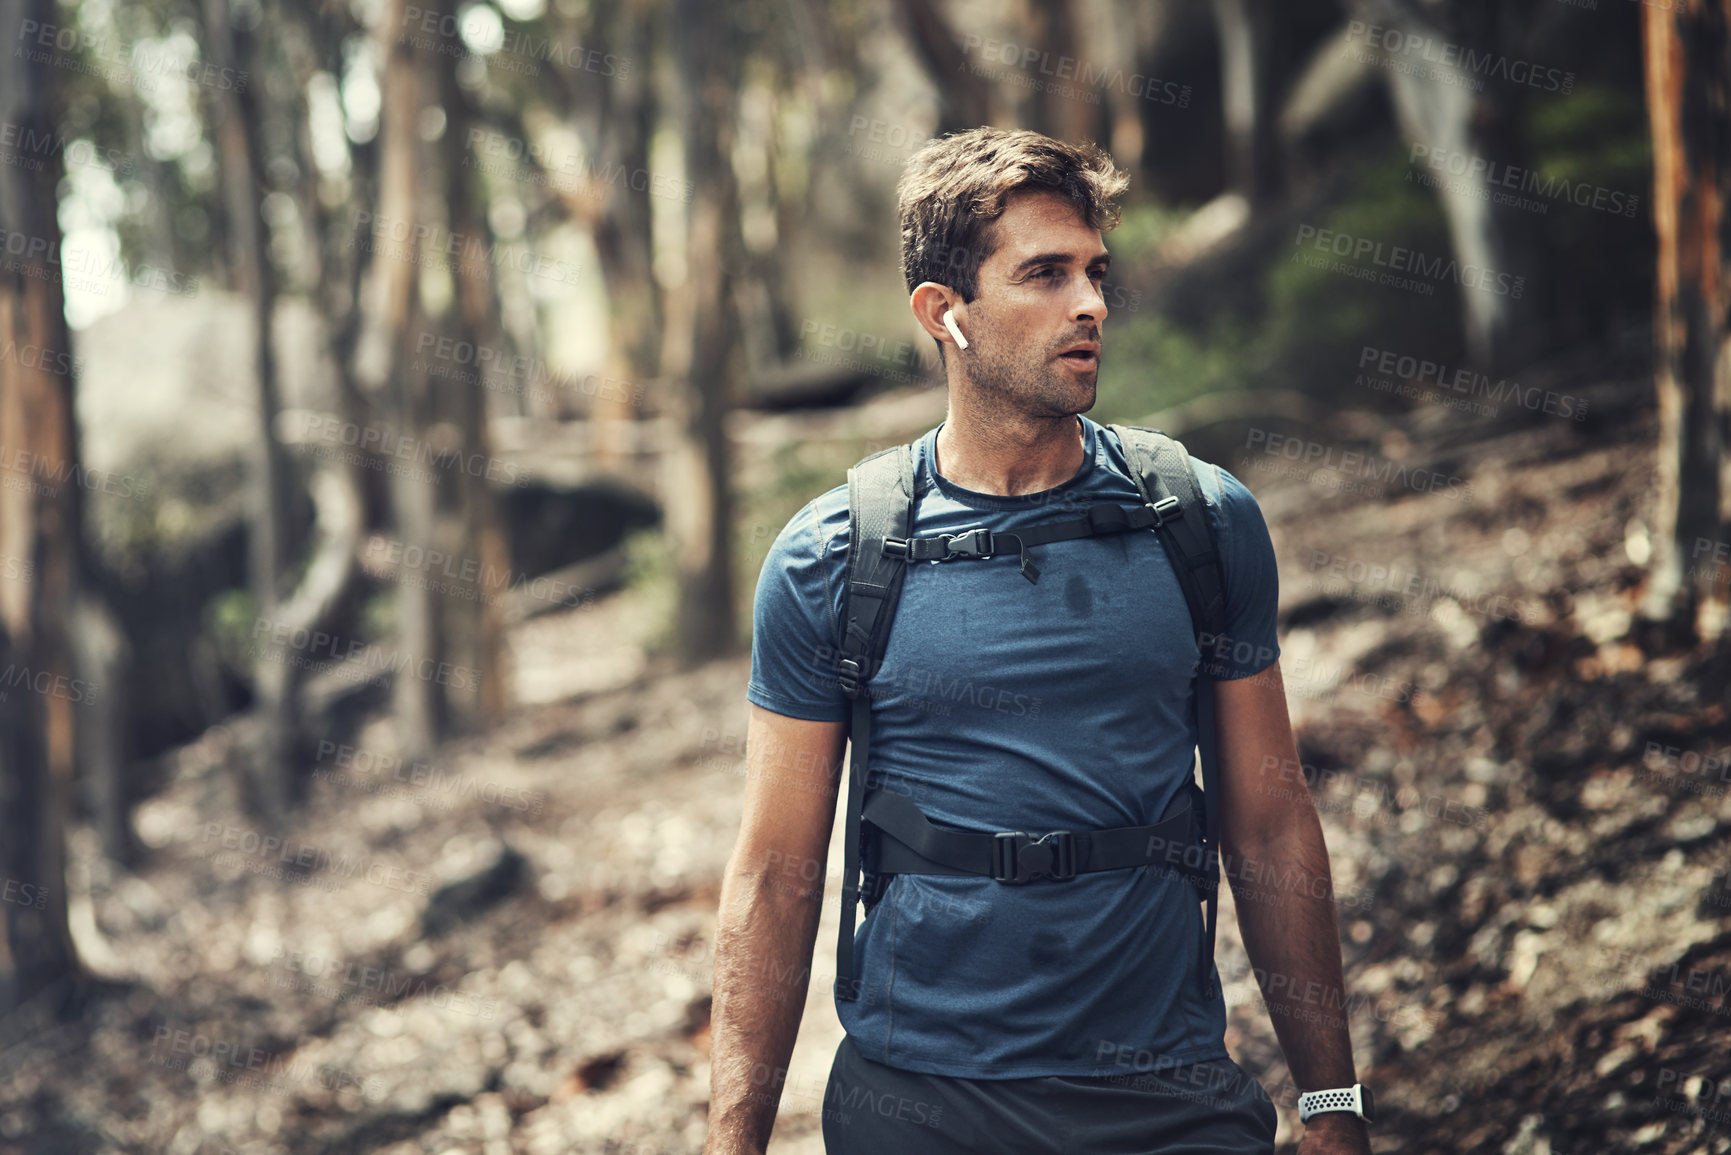 Buy stock photo Cropped shot of a handsome young man out for a hike in the mountains